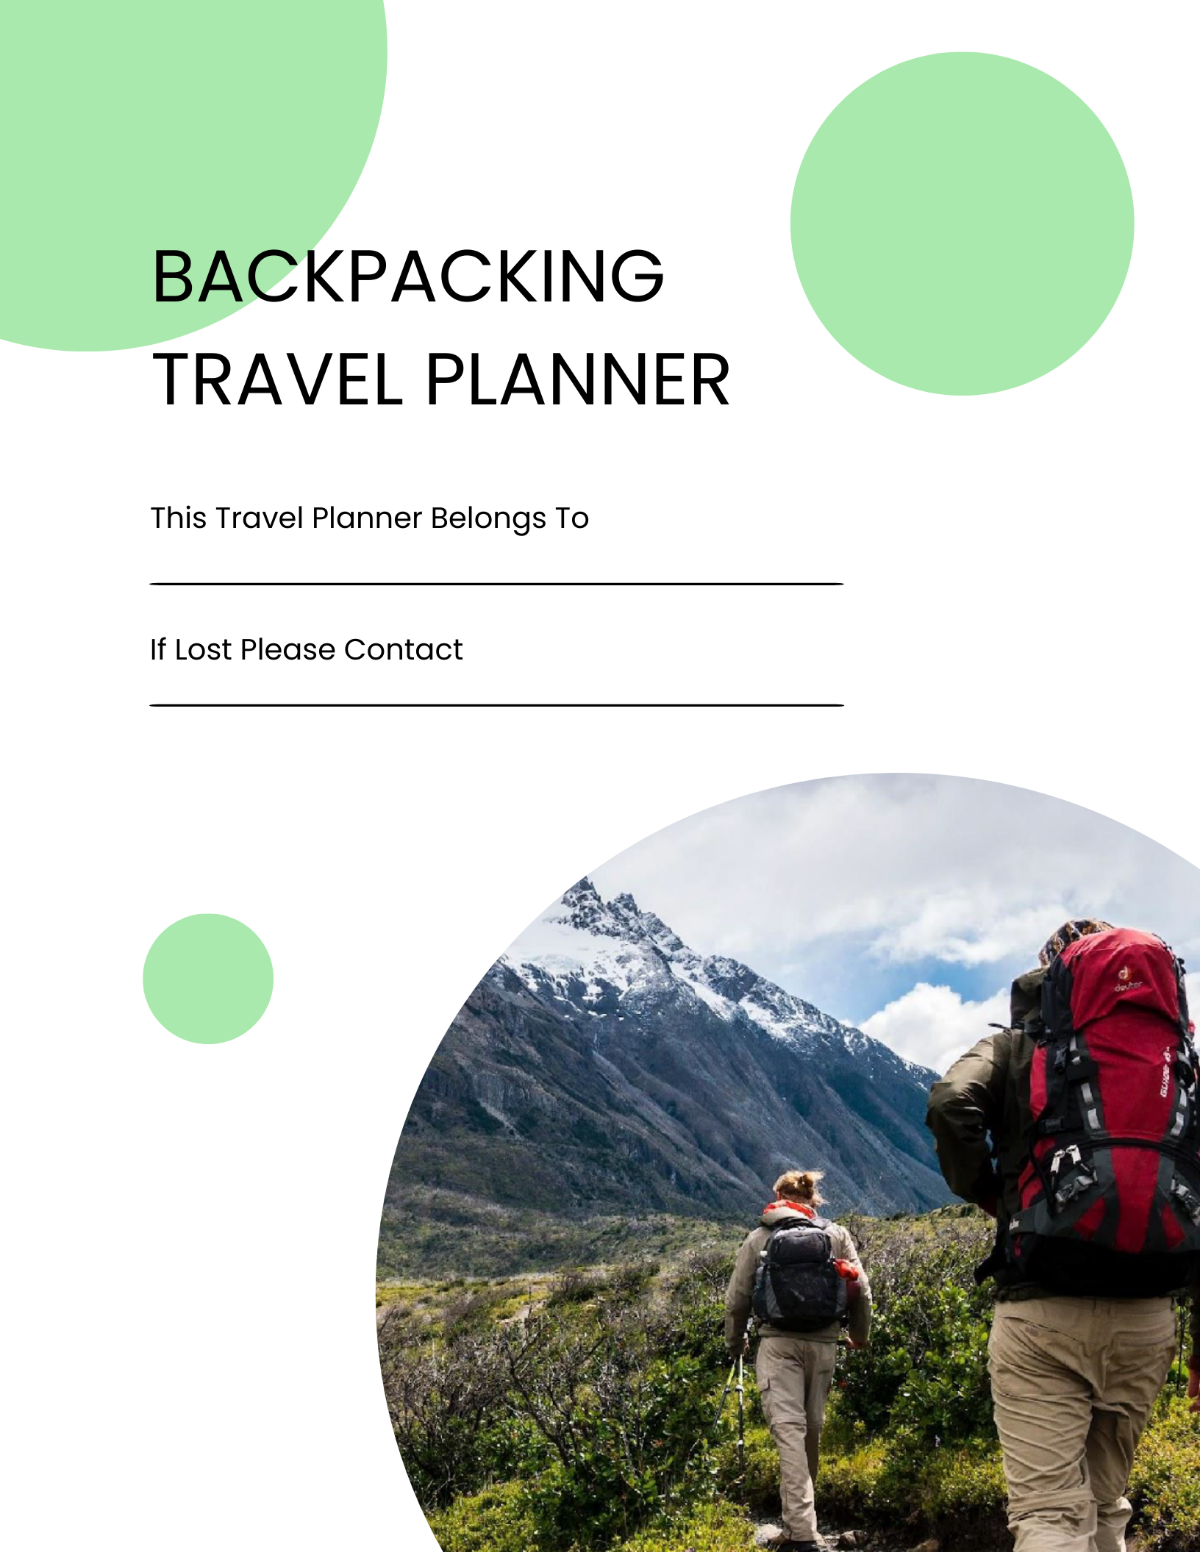 Backpacking Travel Planner Template